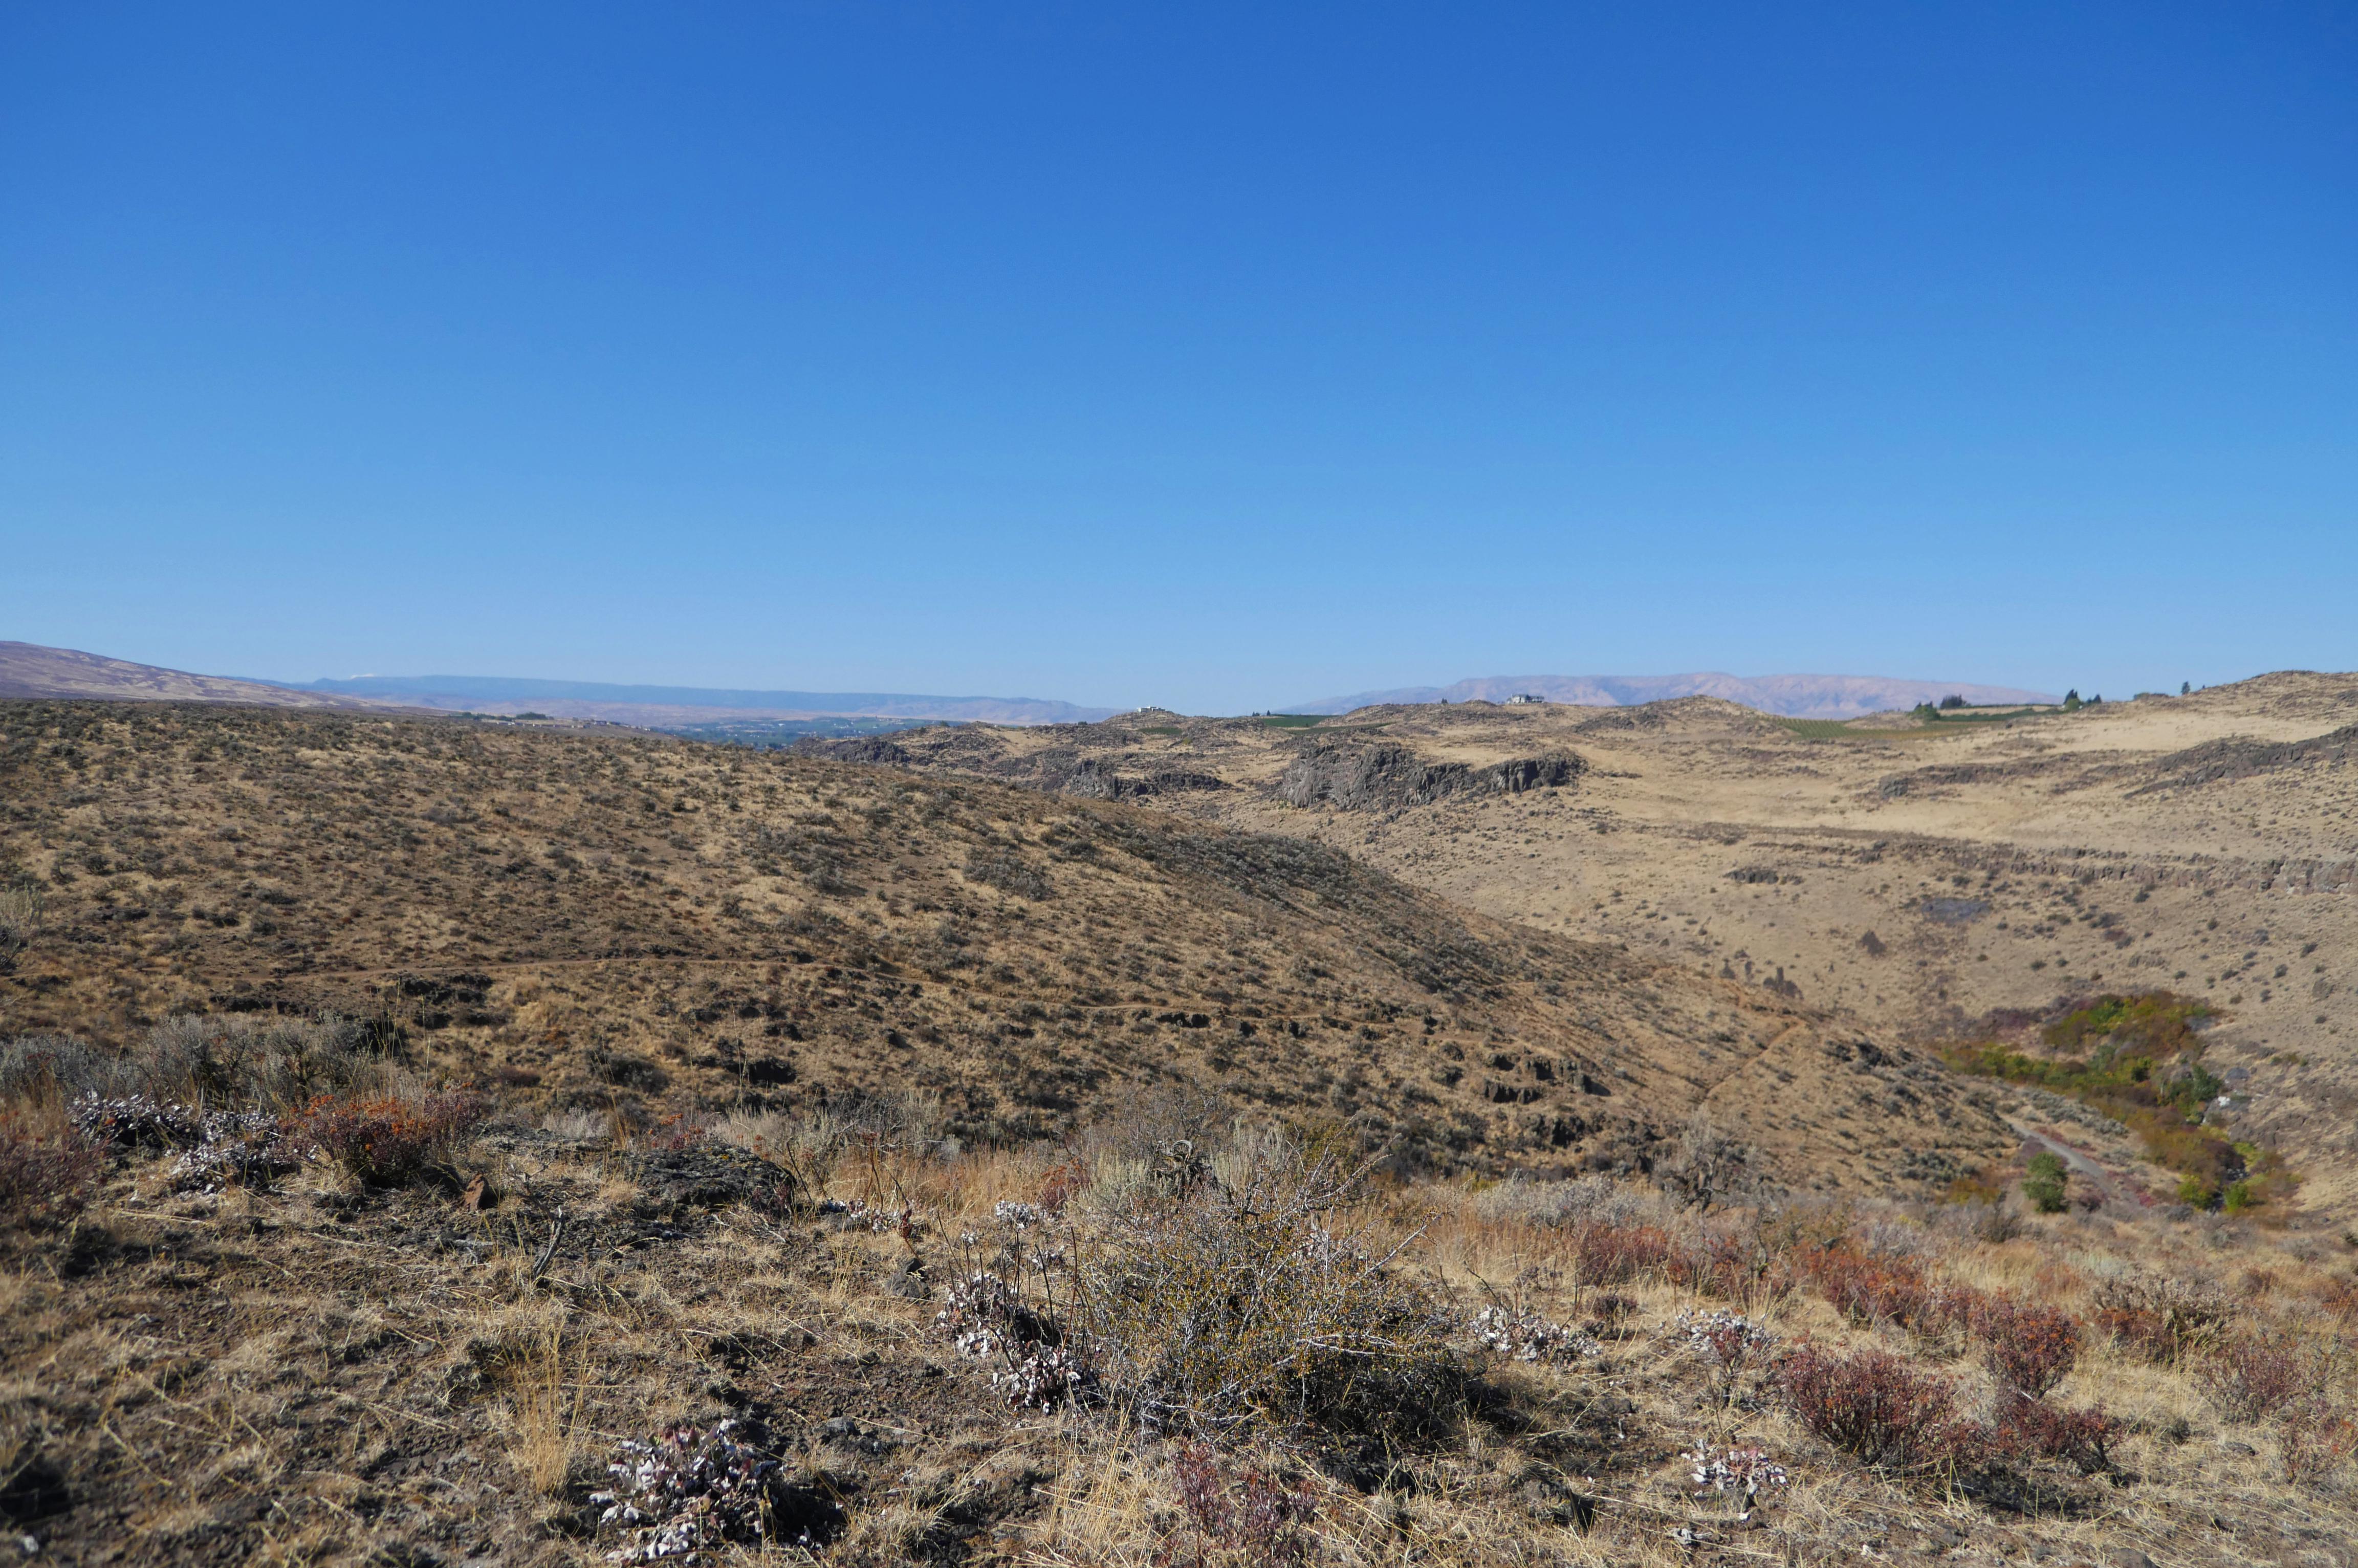 View of the shrub-steppe uplands of Cowiche Canyon Trail System.